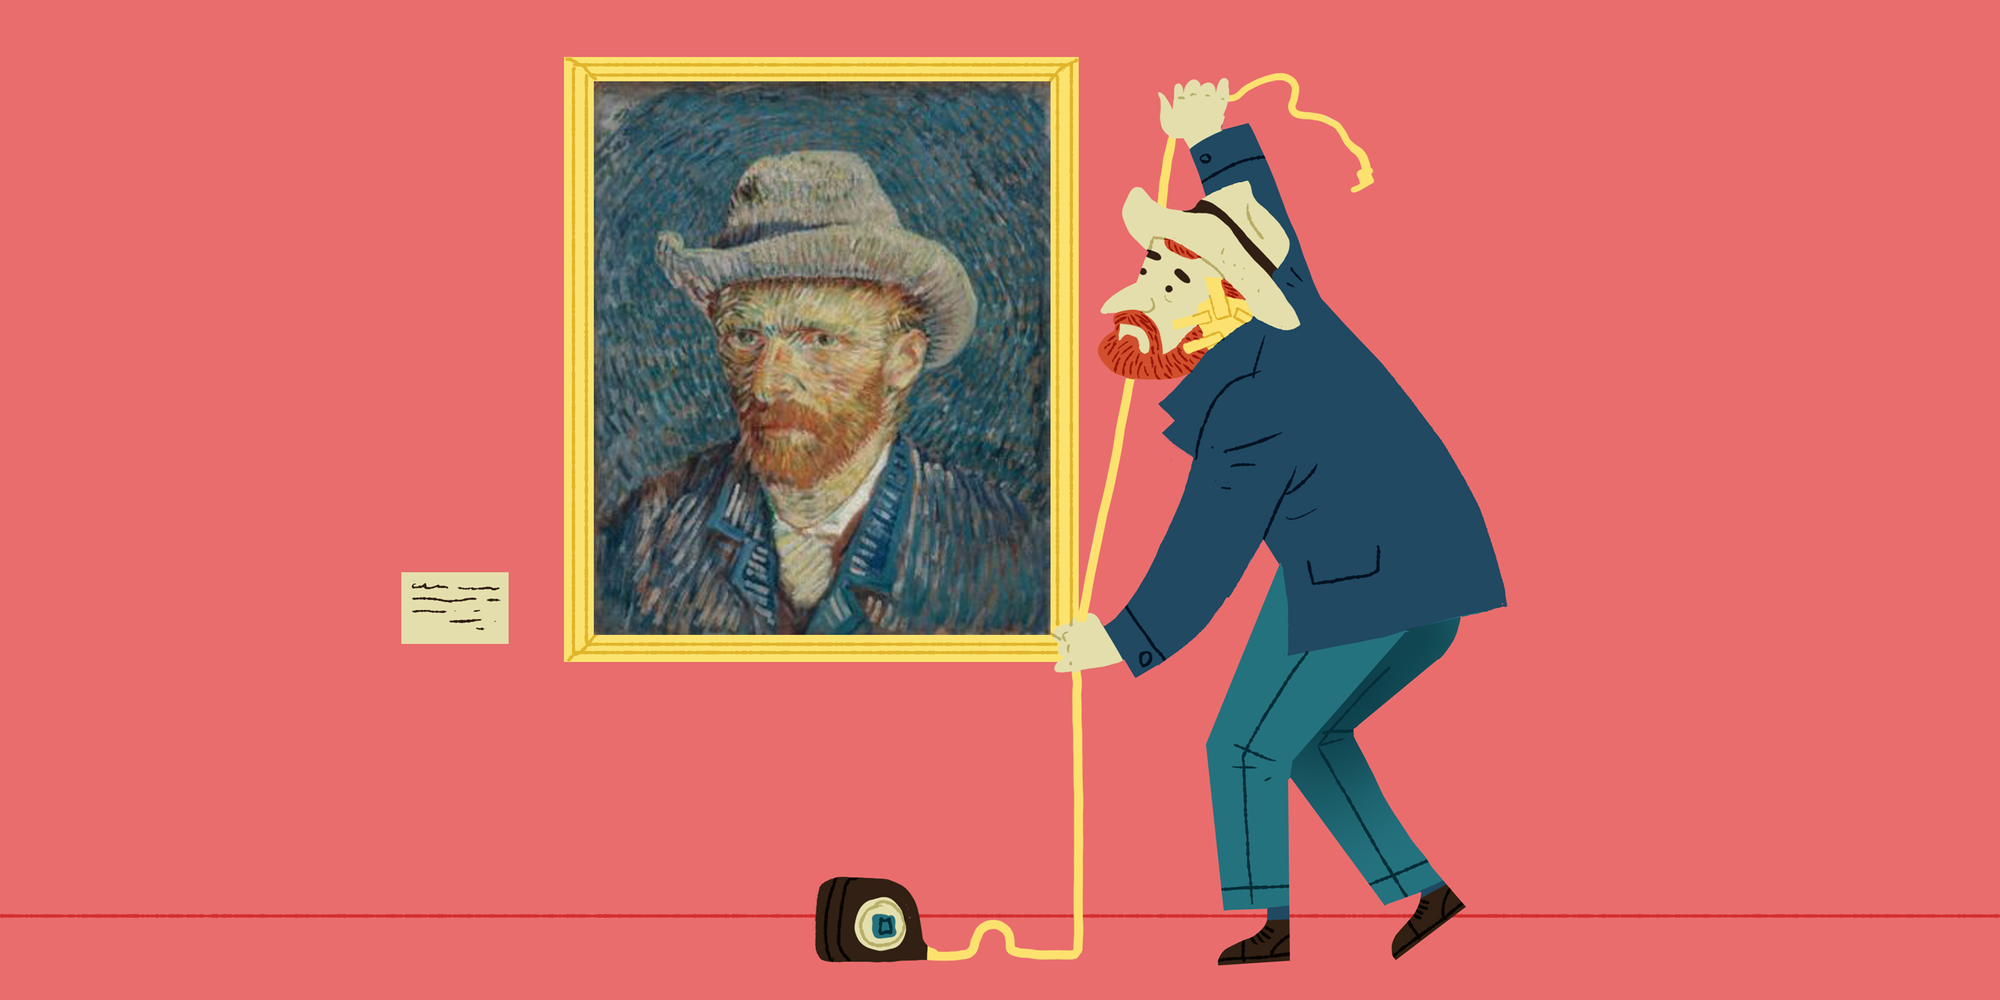 Illustration of a self-portrait of Van Gogh with a little Van gogh figure beside it measuring the painting.